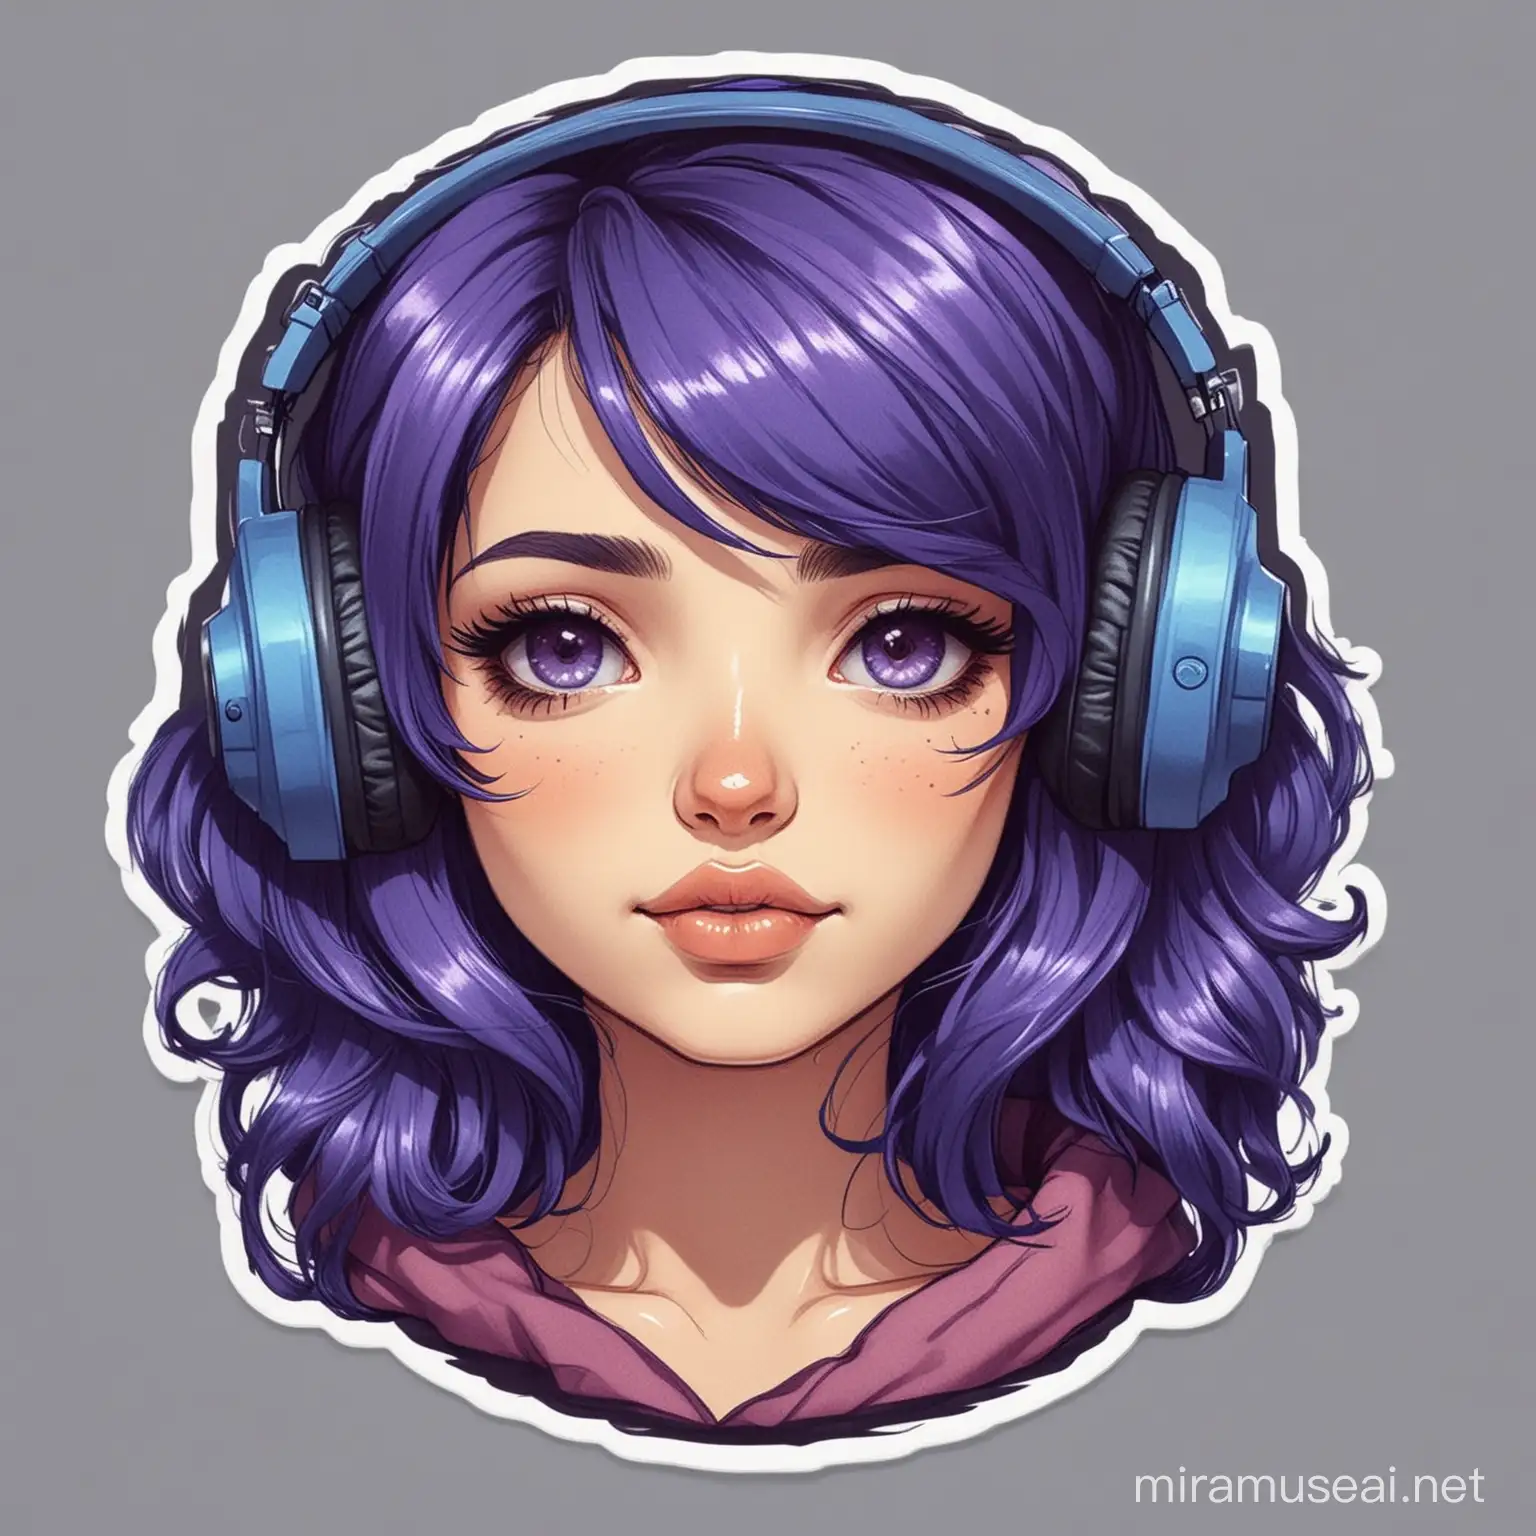 cozy woman, cartoon sticker style, high level detail, dark blue violet colored hair, wearing blue and violet headphones